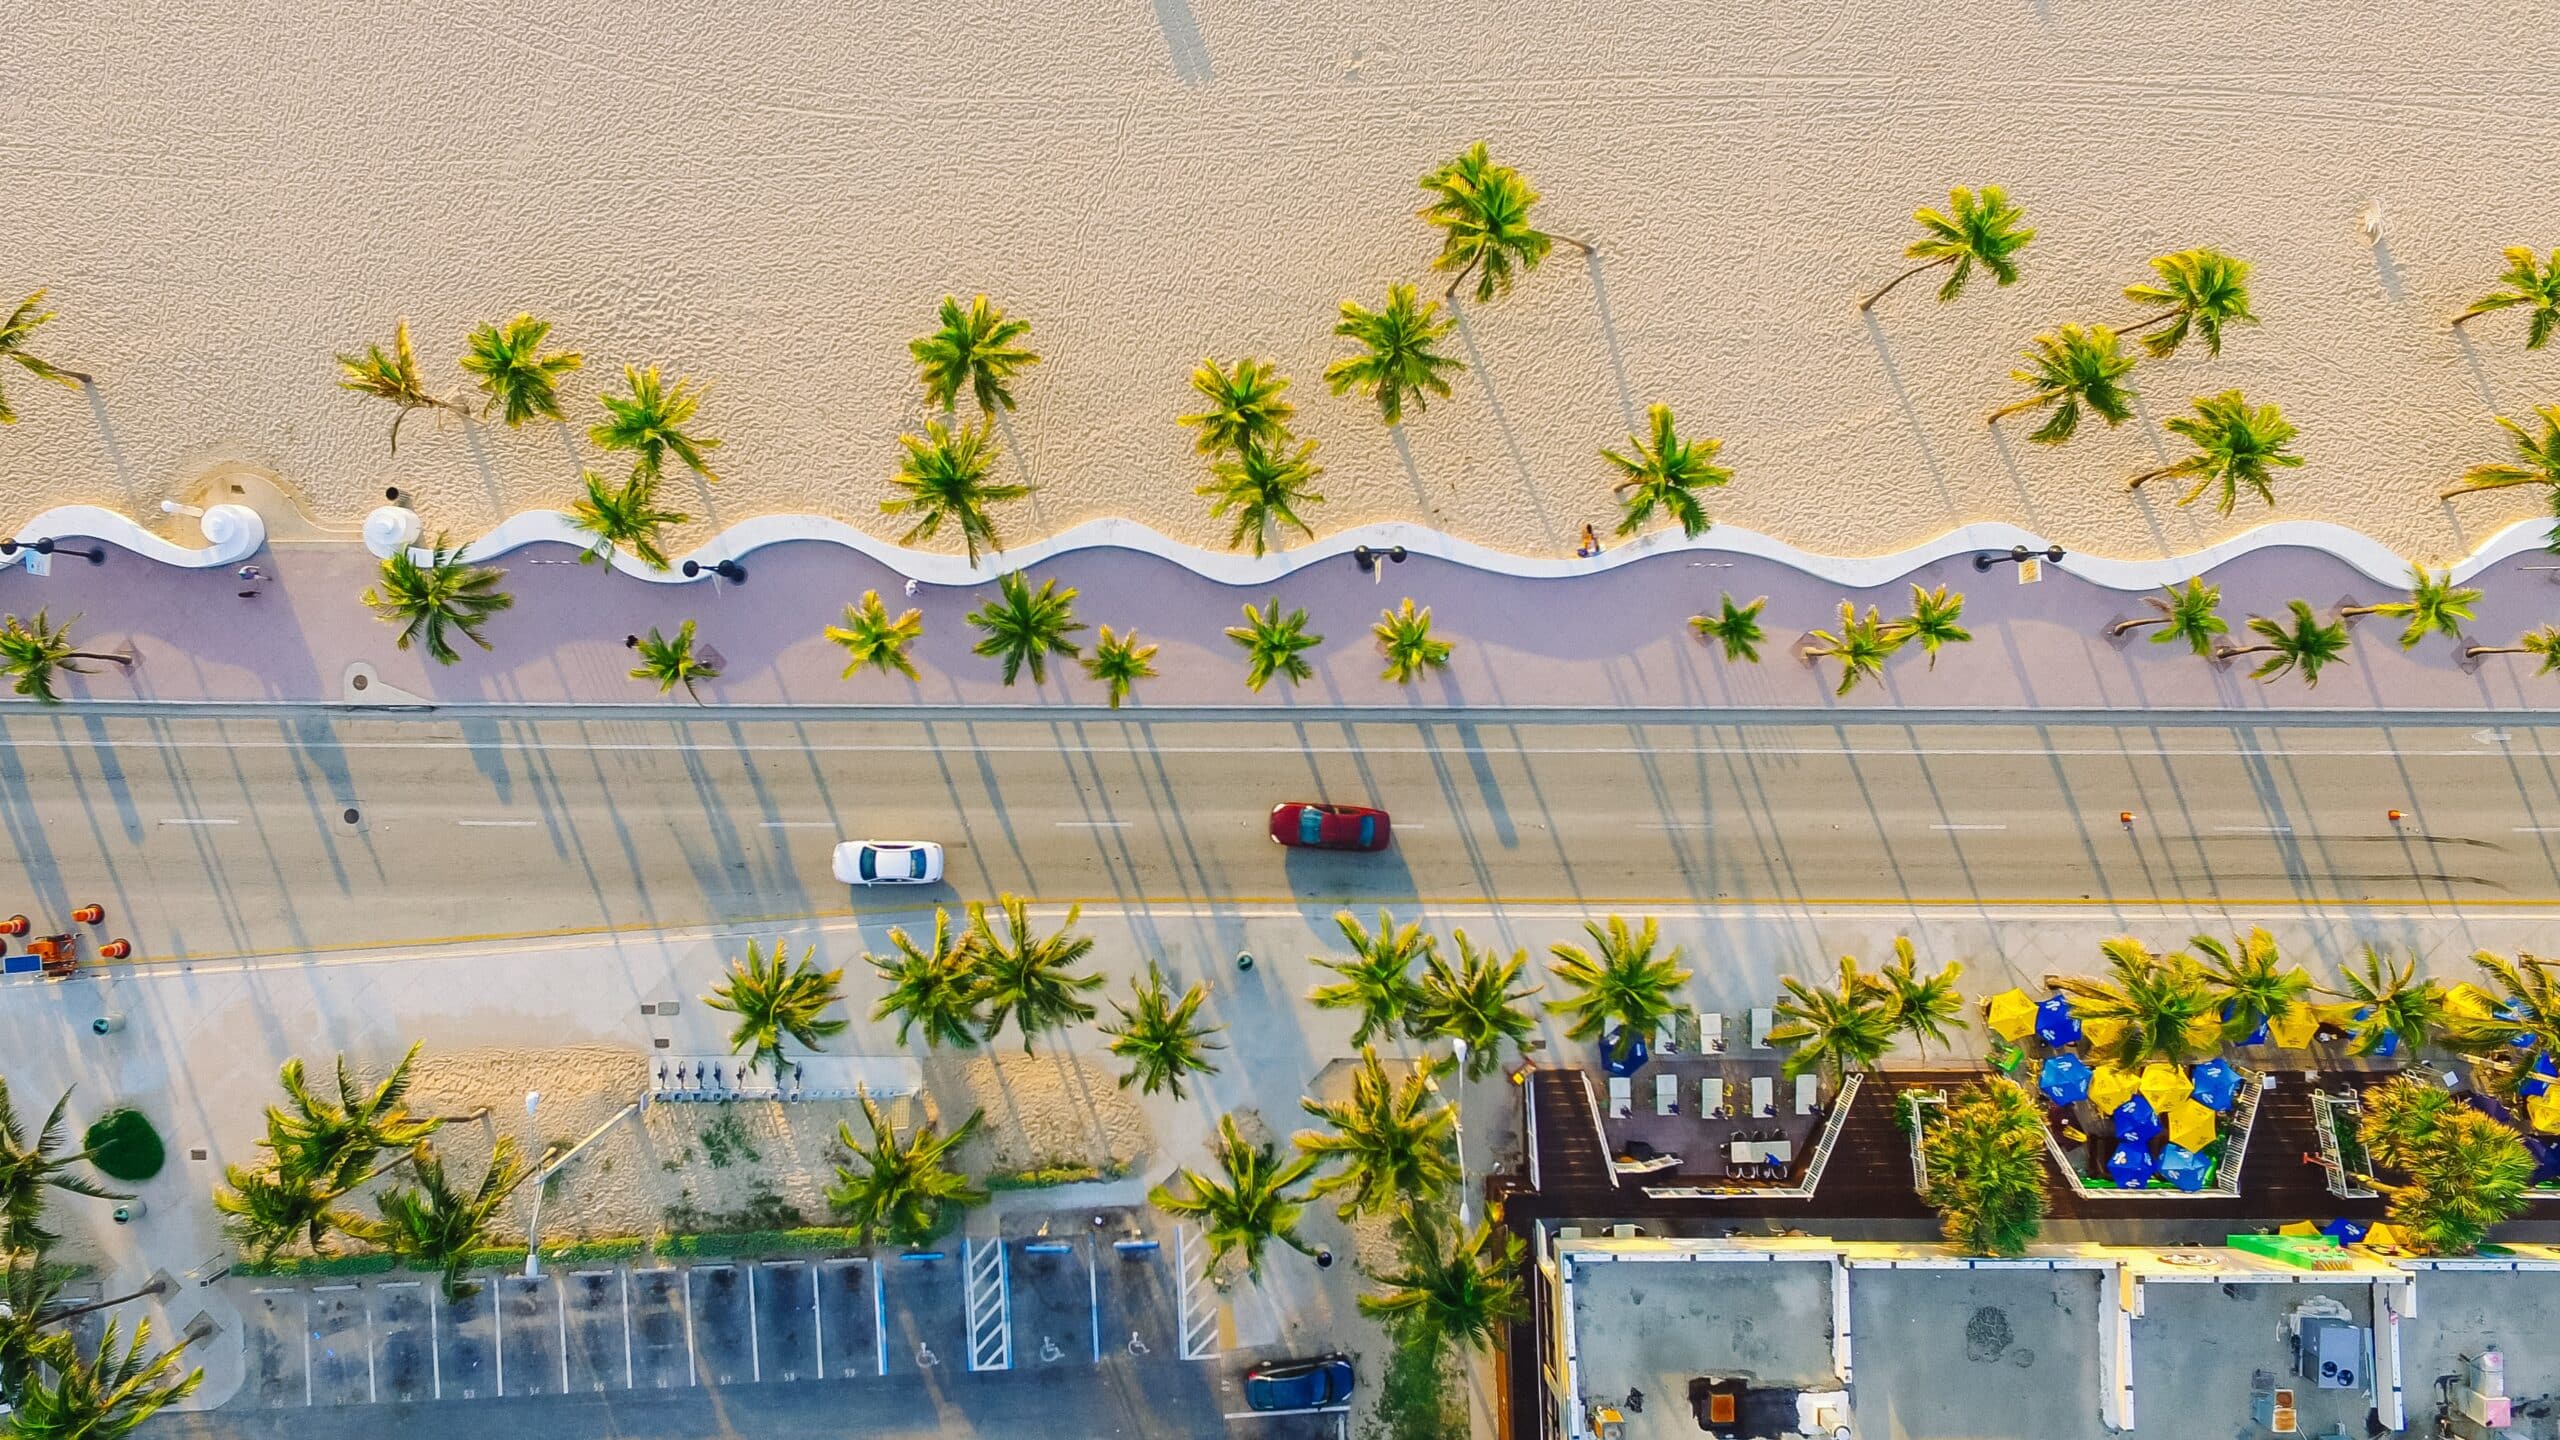 An aerial view of a beach with palm trees.